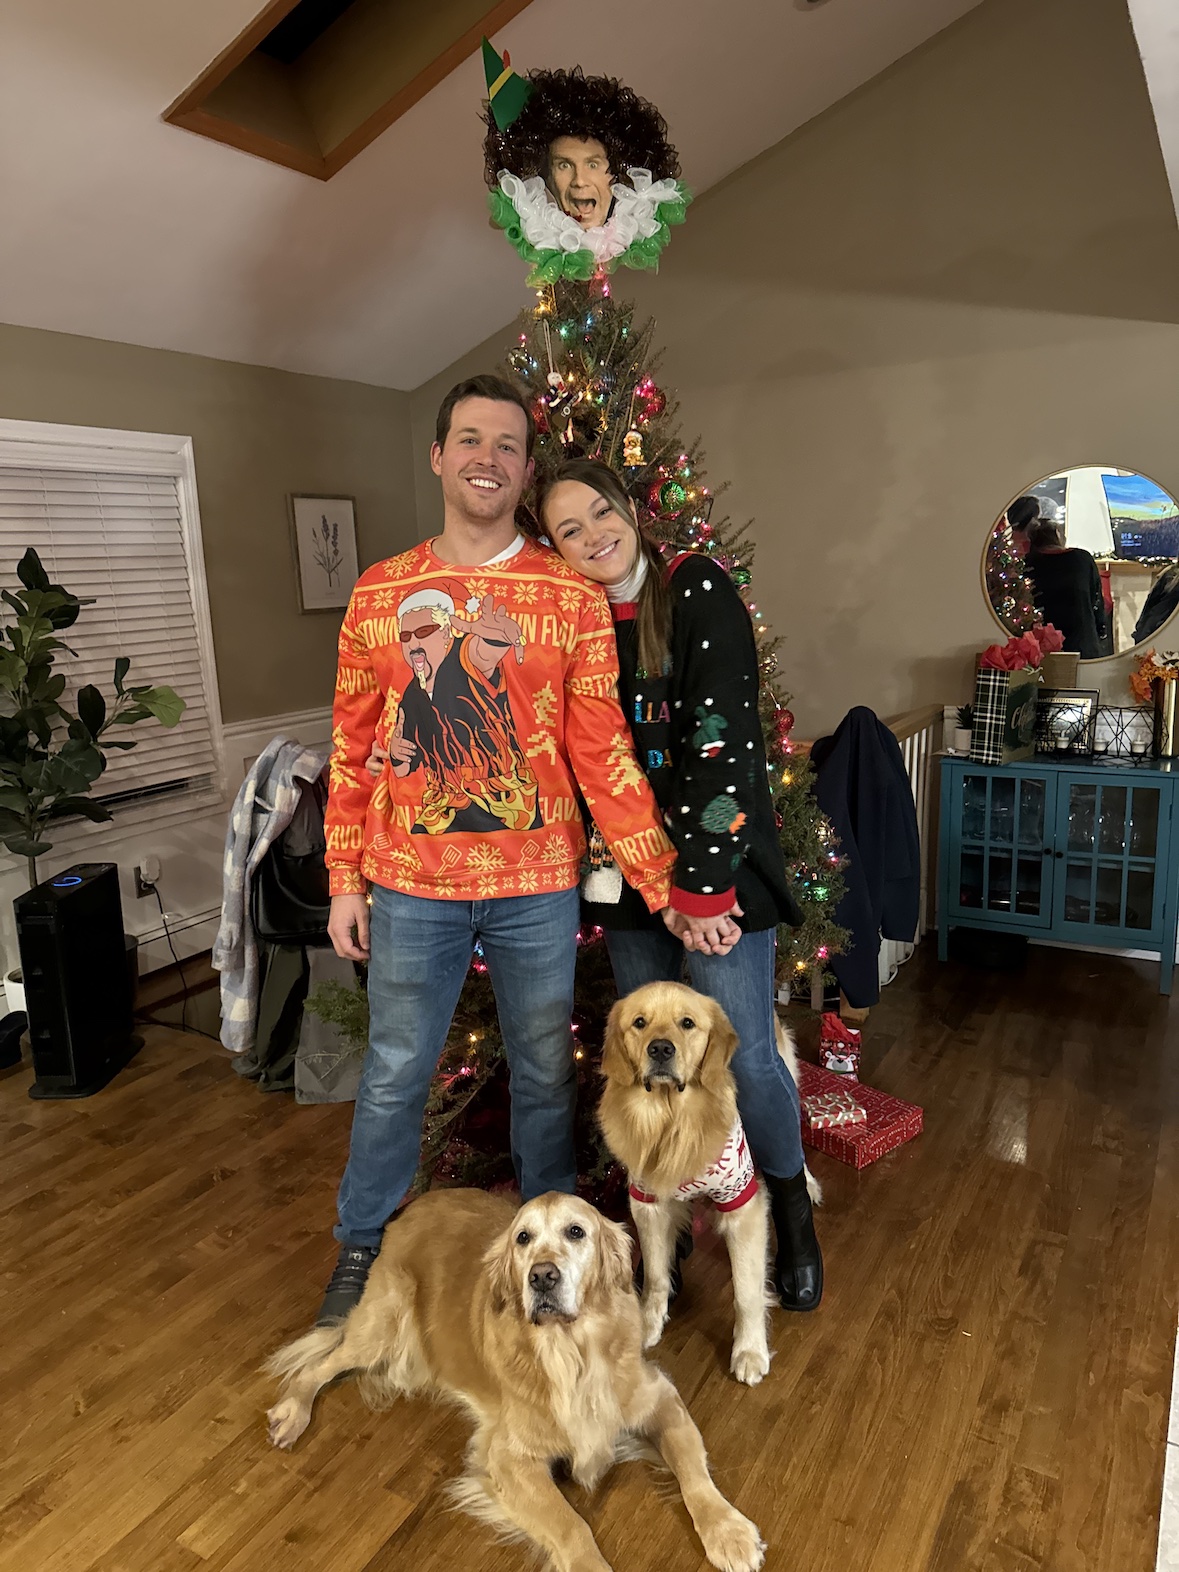 Freddie, Shannon, Finn and Arfur posing in front of a decorated Christmas tree